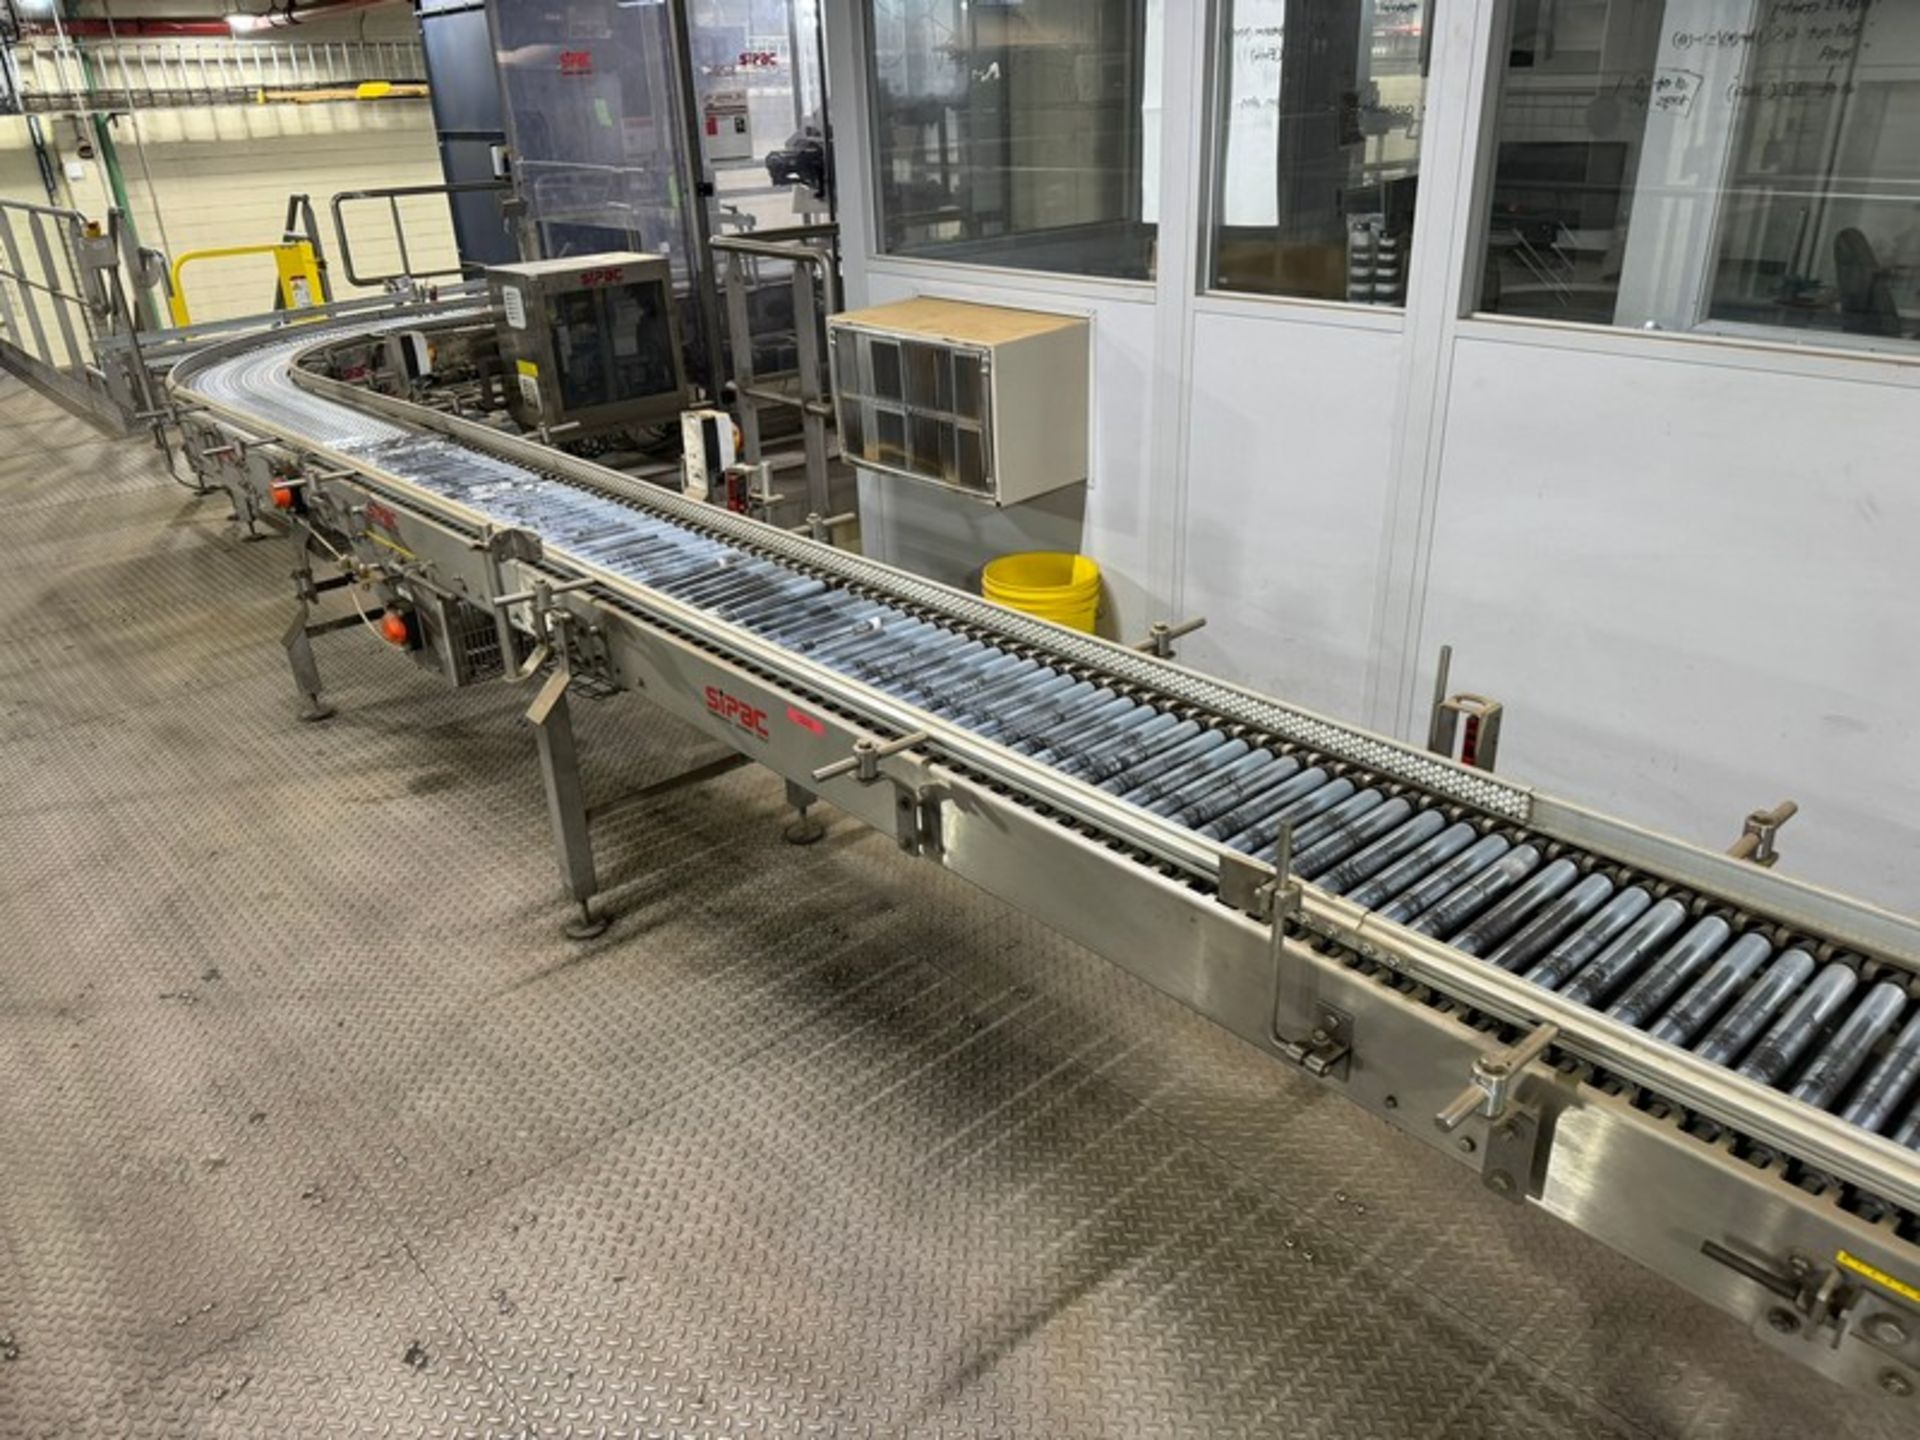 SIPAC Conveyor & Roller Conveyor, with 1-90 Degree Turn, with Aprox. 12” W Conveyor Belt, with - Image 4 of 6